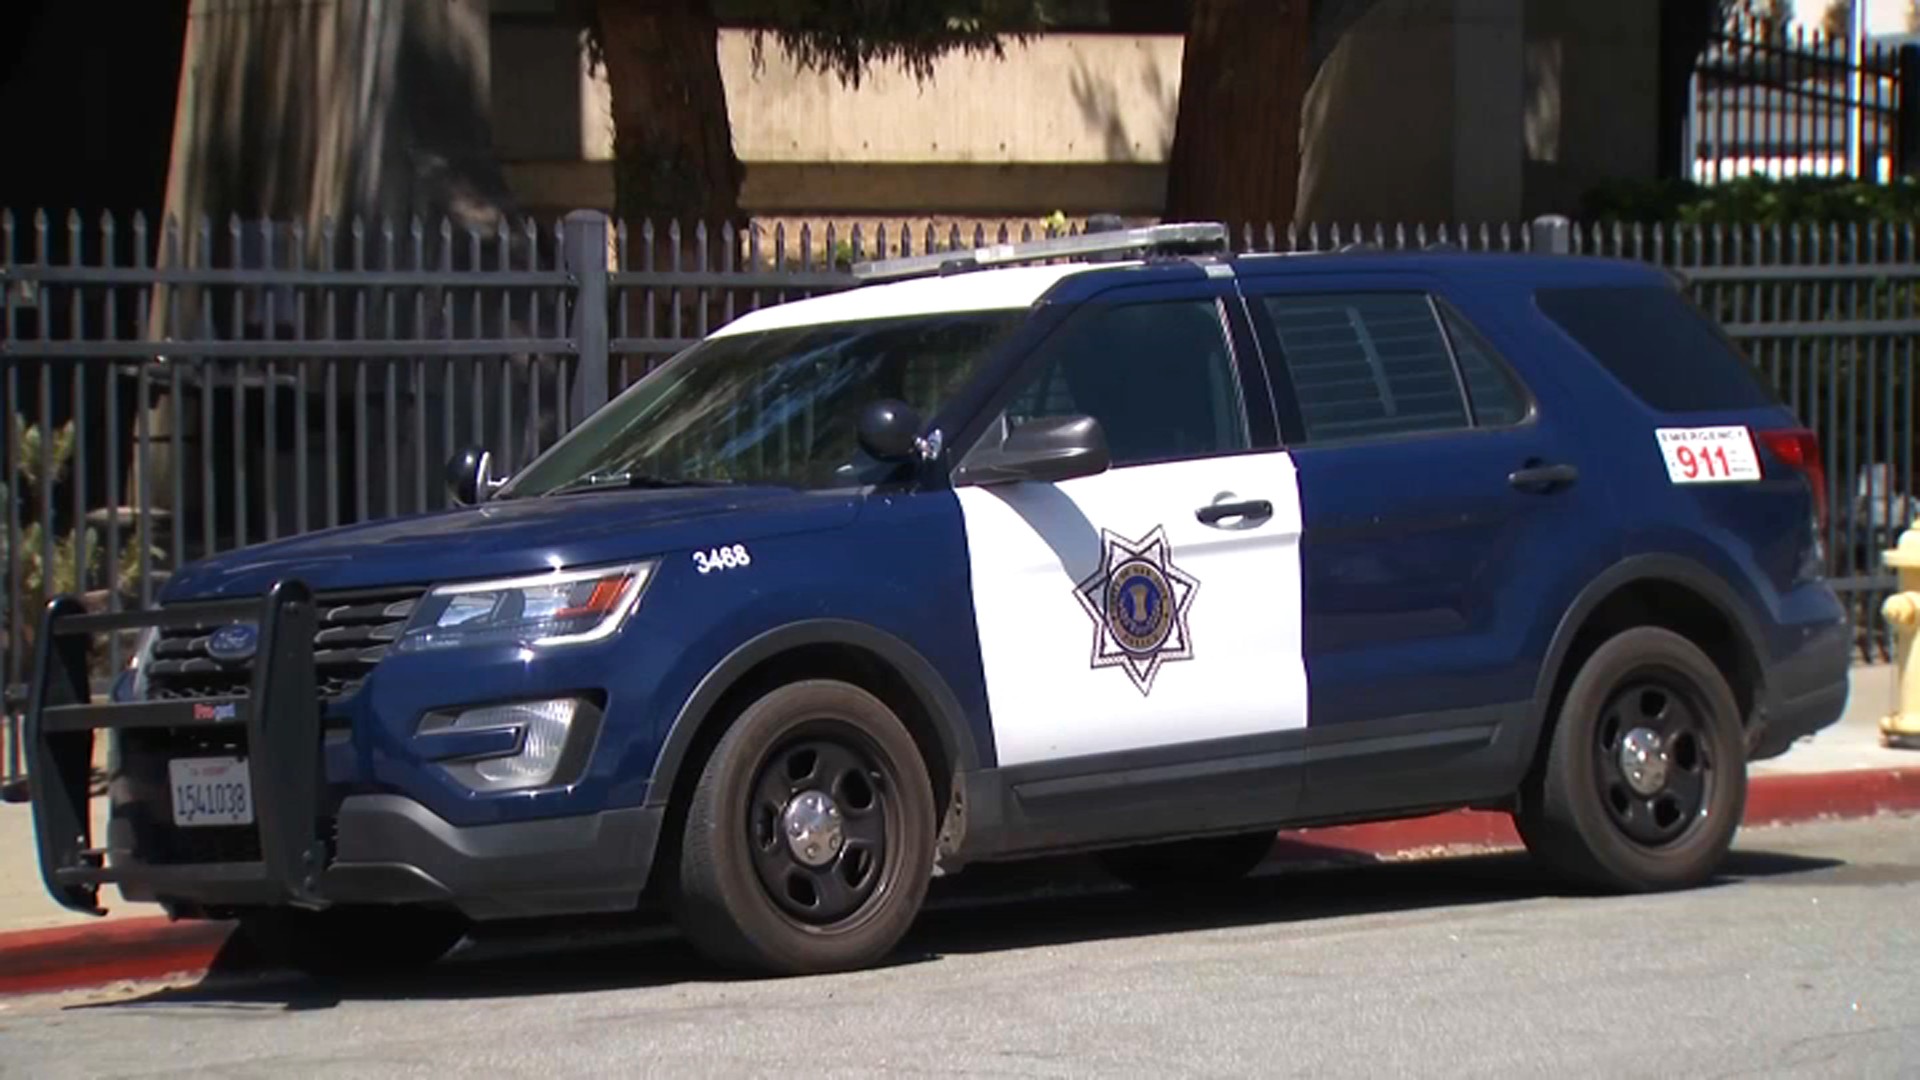 New Sexual Battery Charges for San Jose Officer Accused of Masturbating in Front of Family